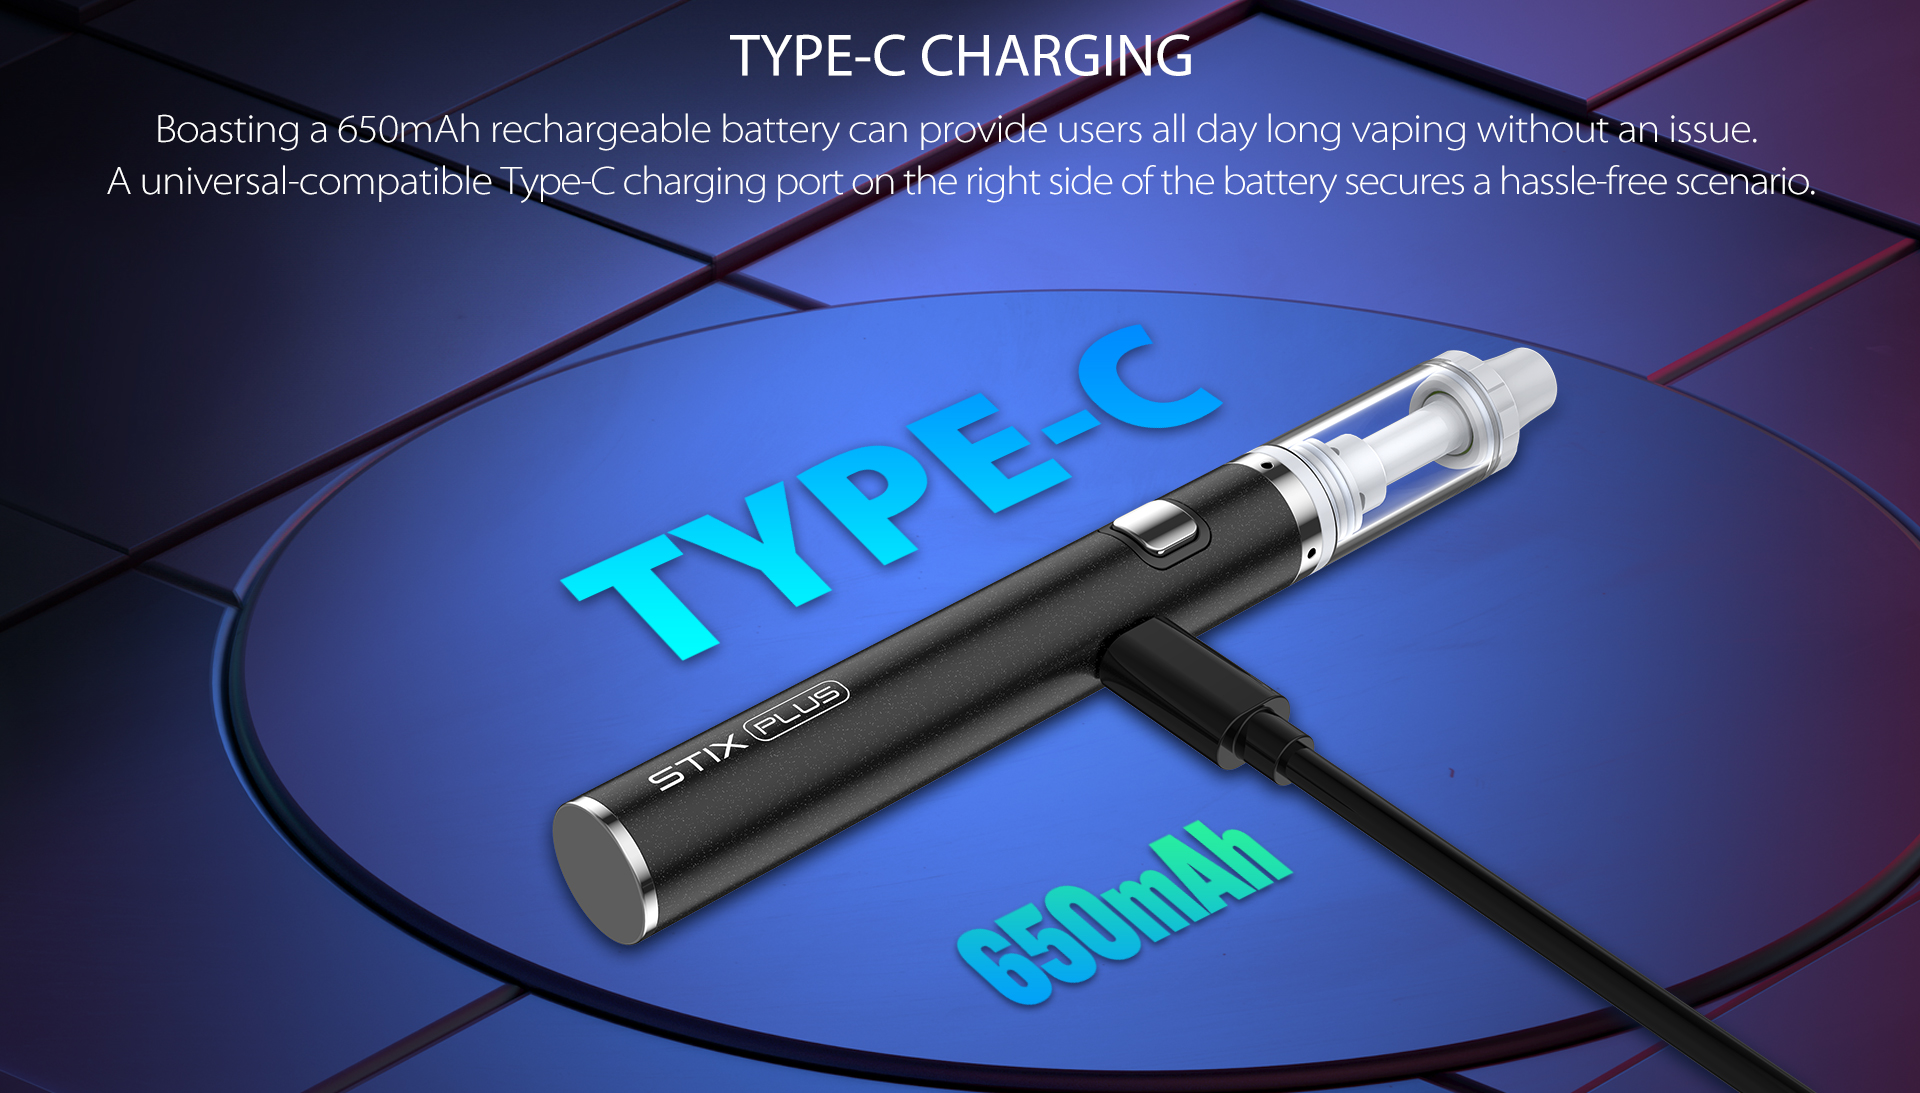 Yocan Stix Plus vape pen Boasting a 650mAh rechargeable battery and A universal-compatible Type-C charging port.